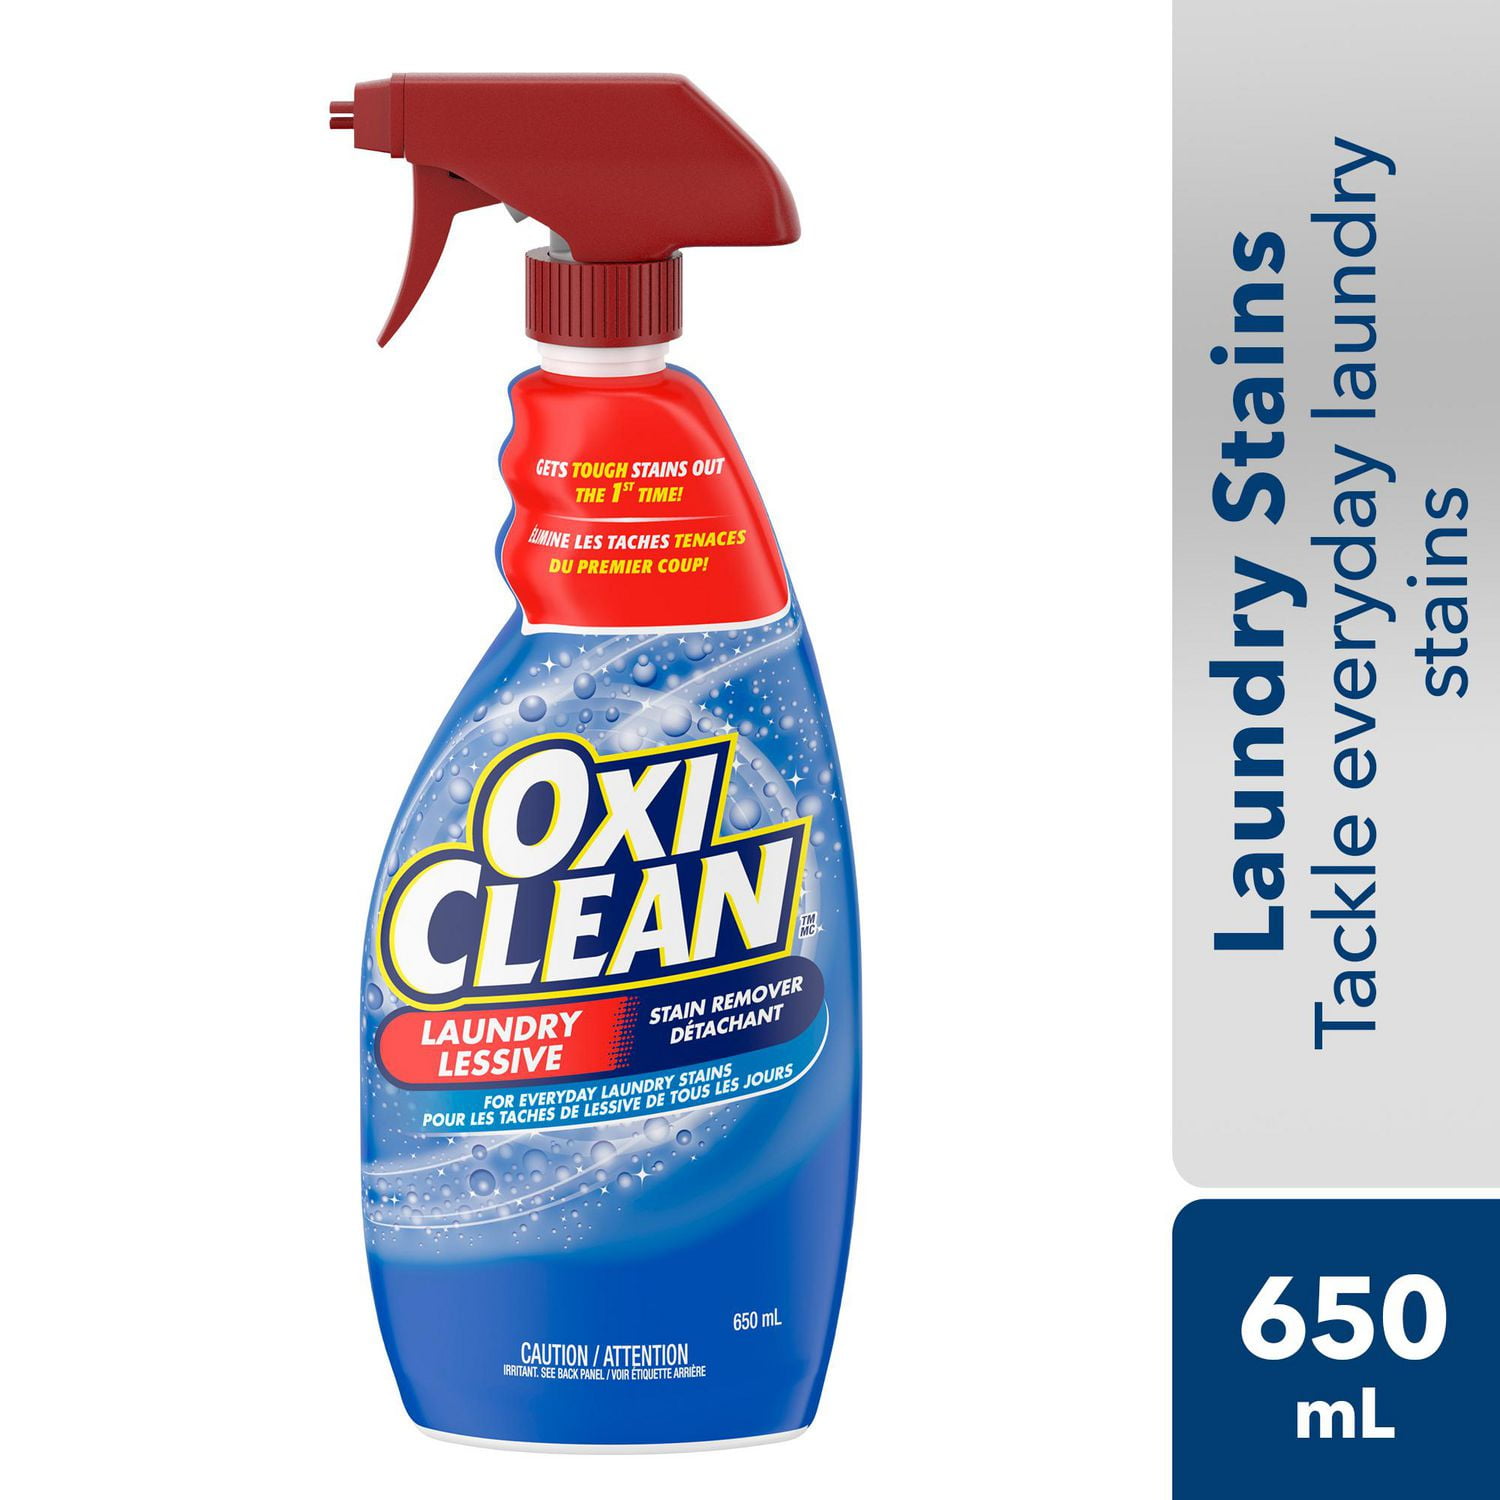 OxiClean Laundry Stain Remover Spray, 650ml Spray 